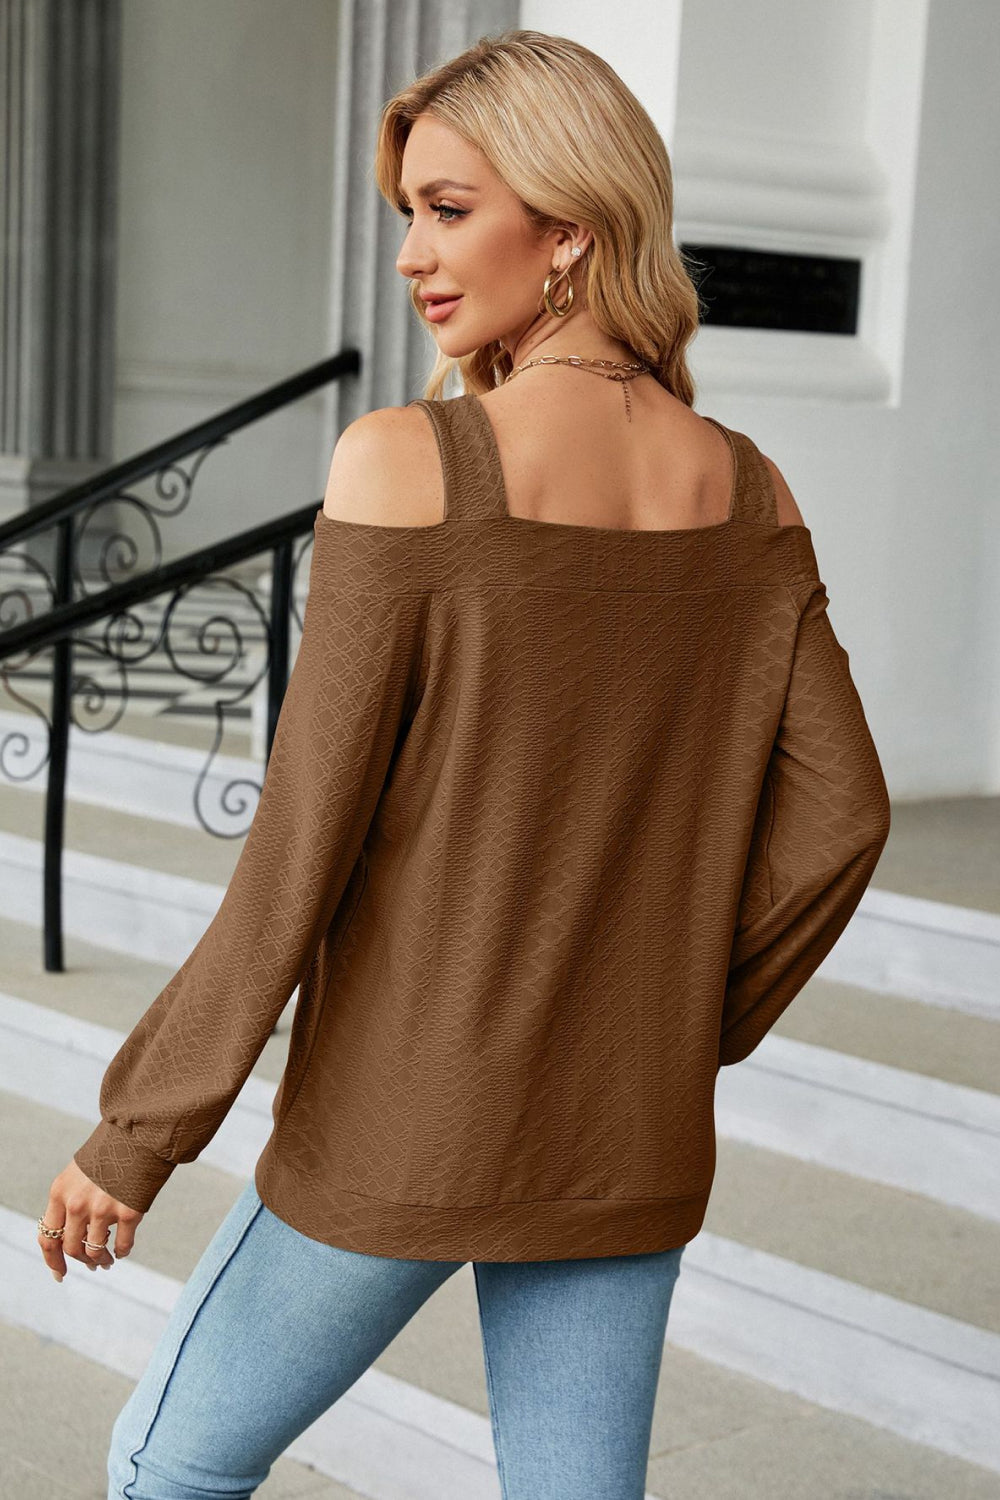 Cold Shoulder Square Neck Cutout Blouse - Women’s Clothing & Accessories - Shirts & Tops - 12 - 2024